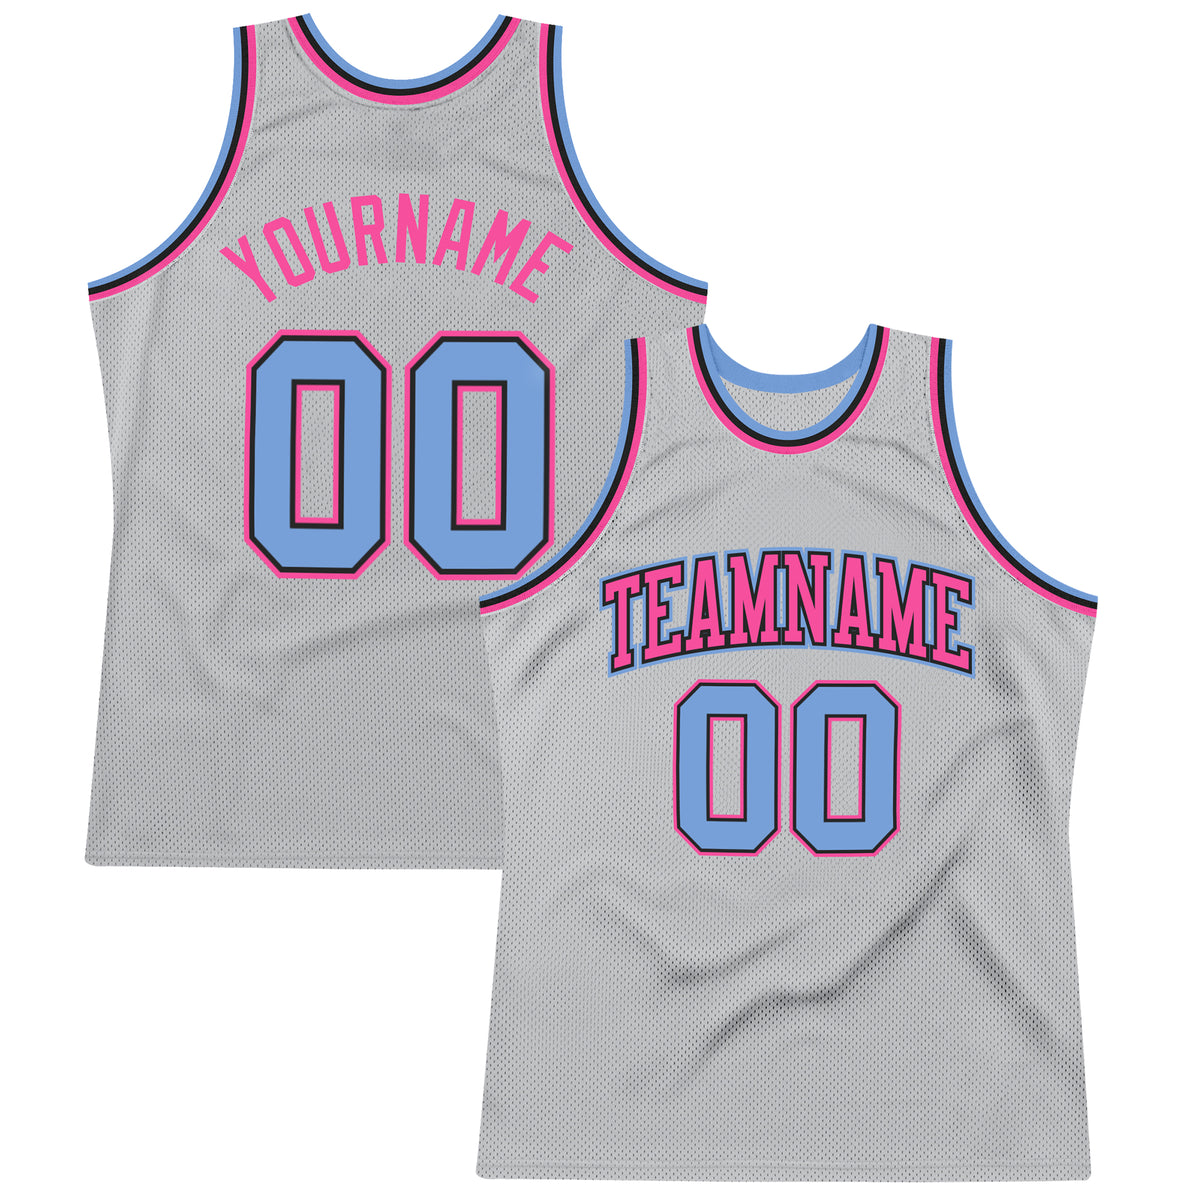 Custom Light Pink White-Light Blue Authentic Throwback Basketball Jersey  Discount